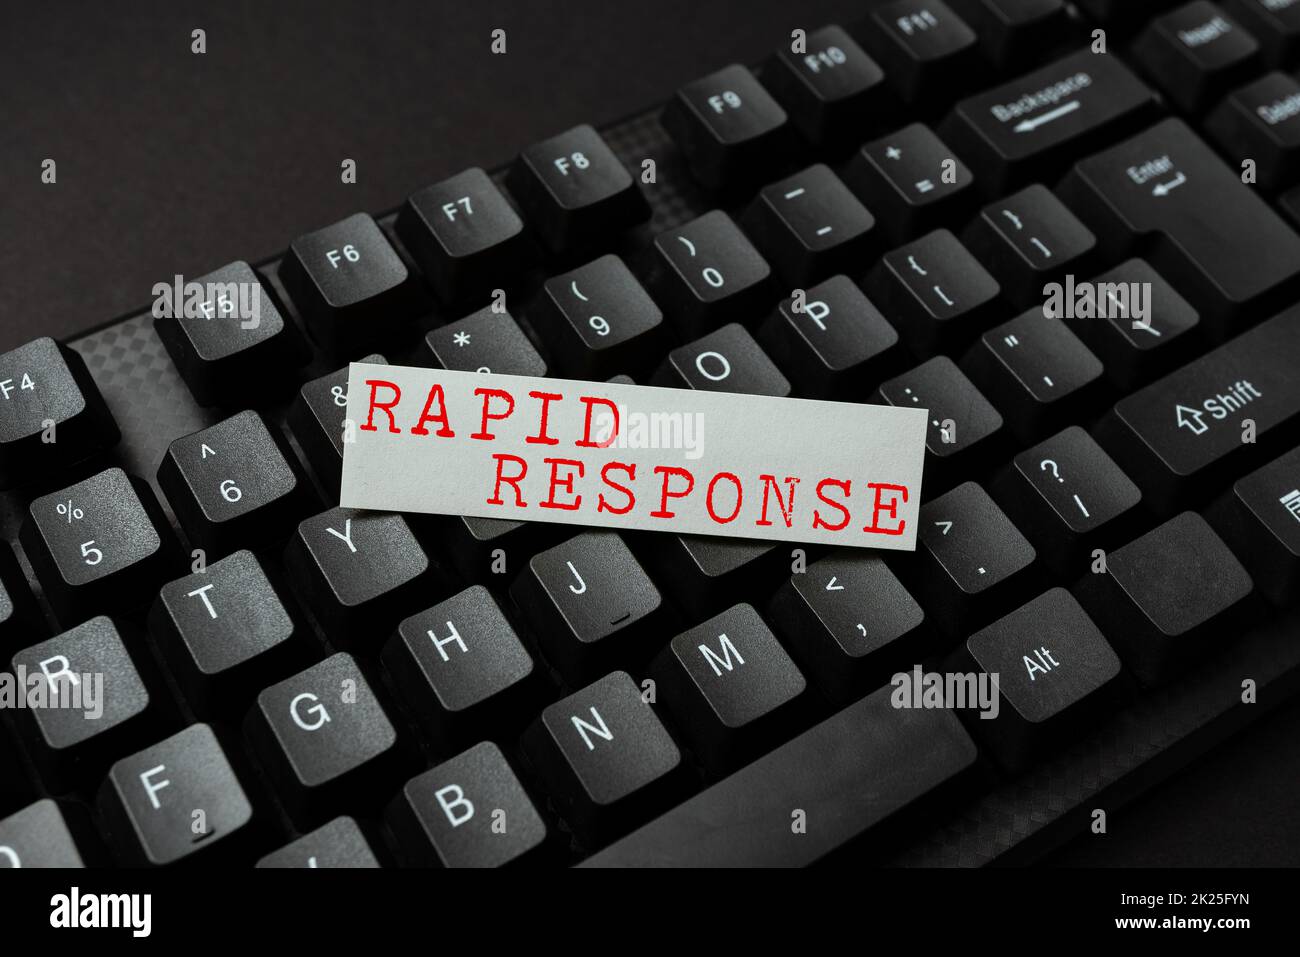 Text caption presenting Rapid Response. Business overview Medical emergency team Quick assistance during disaster Entering New Programming Codes, Typing Emotional Short Stories Stock Photo